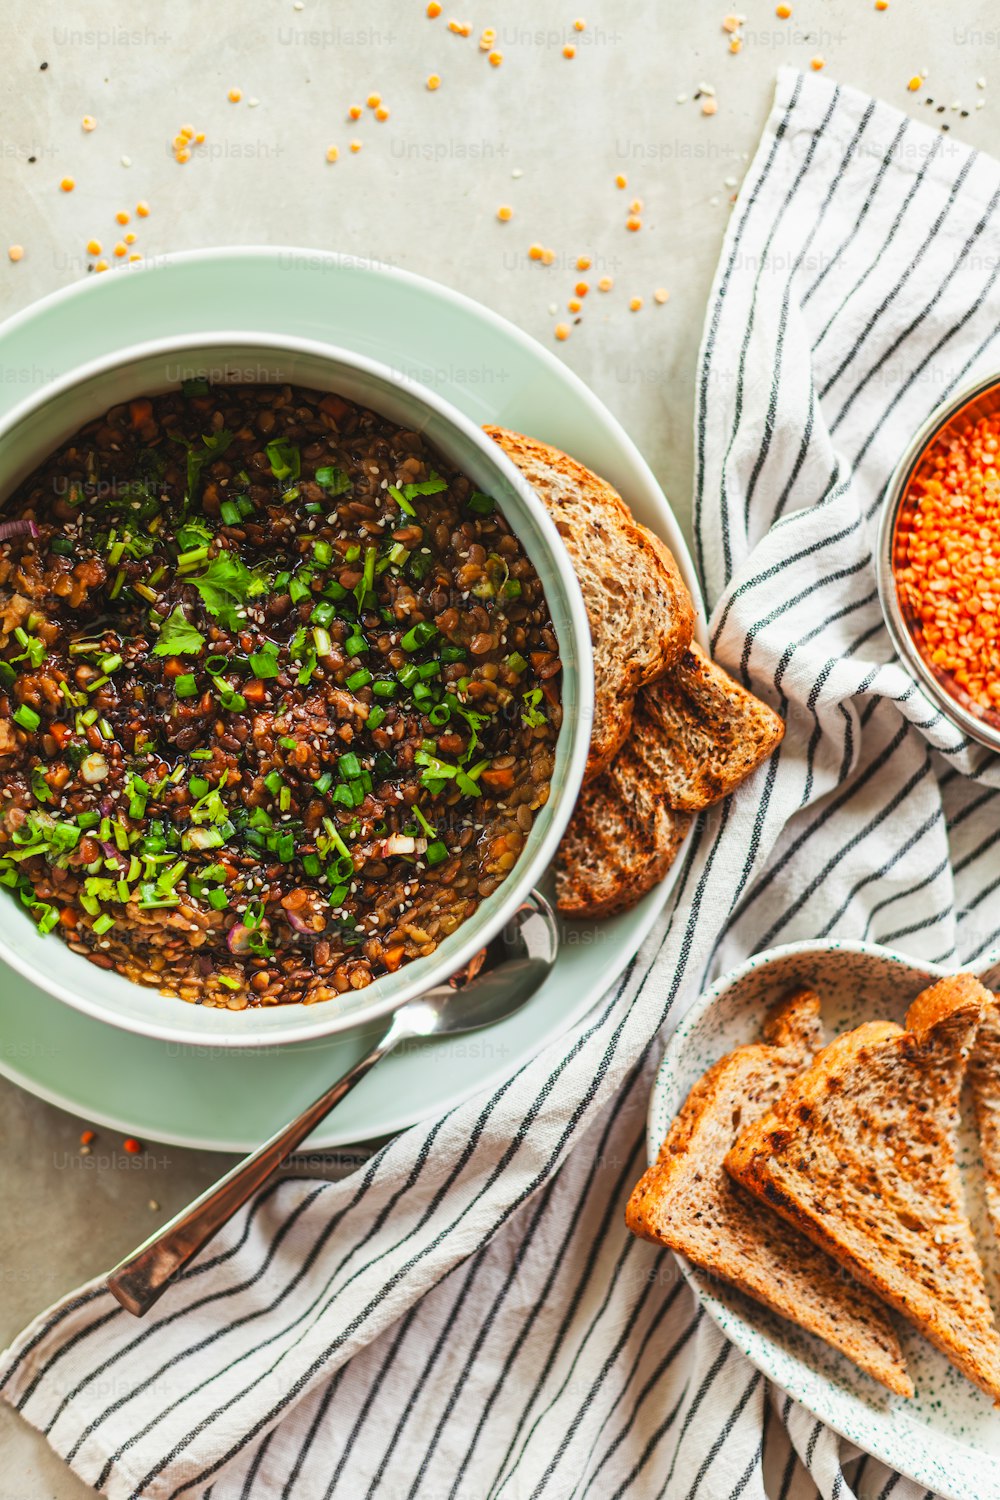 a bowl of beans and bread on a table